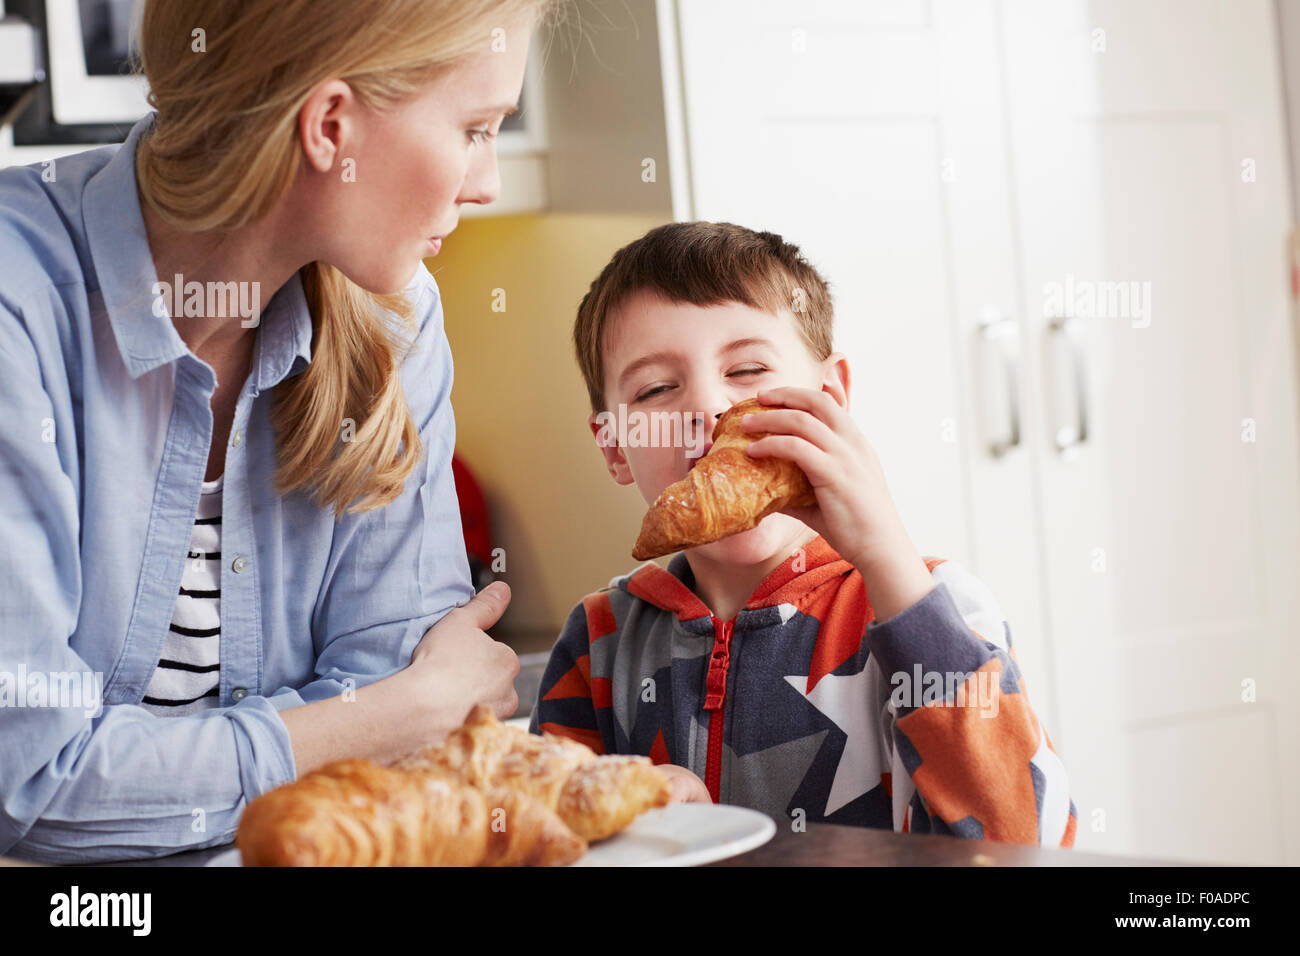 Boy biting croissant, mother watching Stock Photo